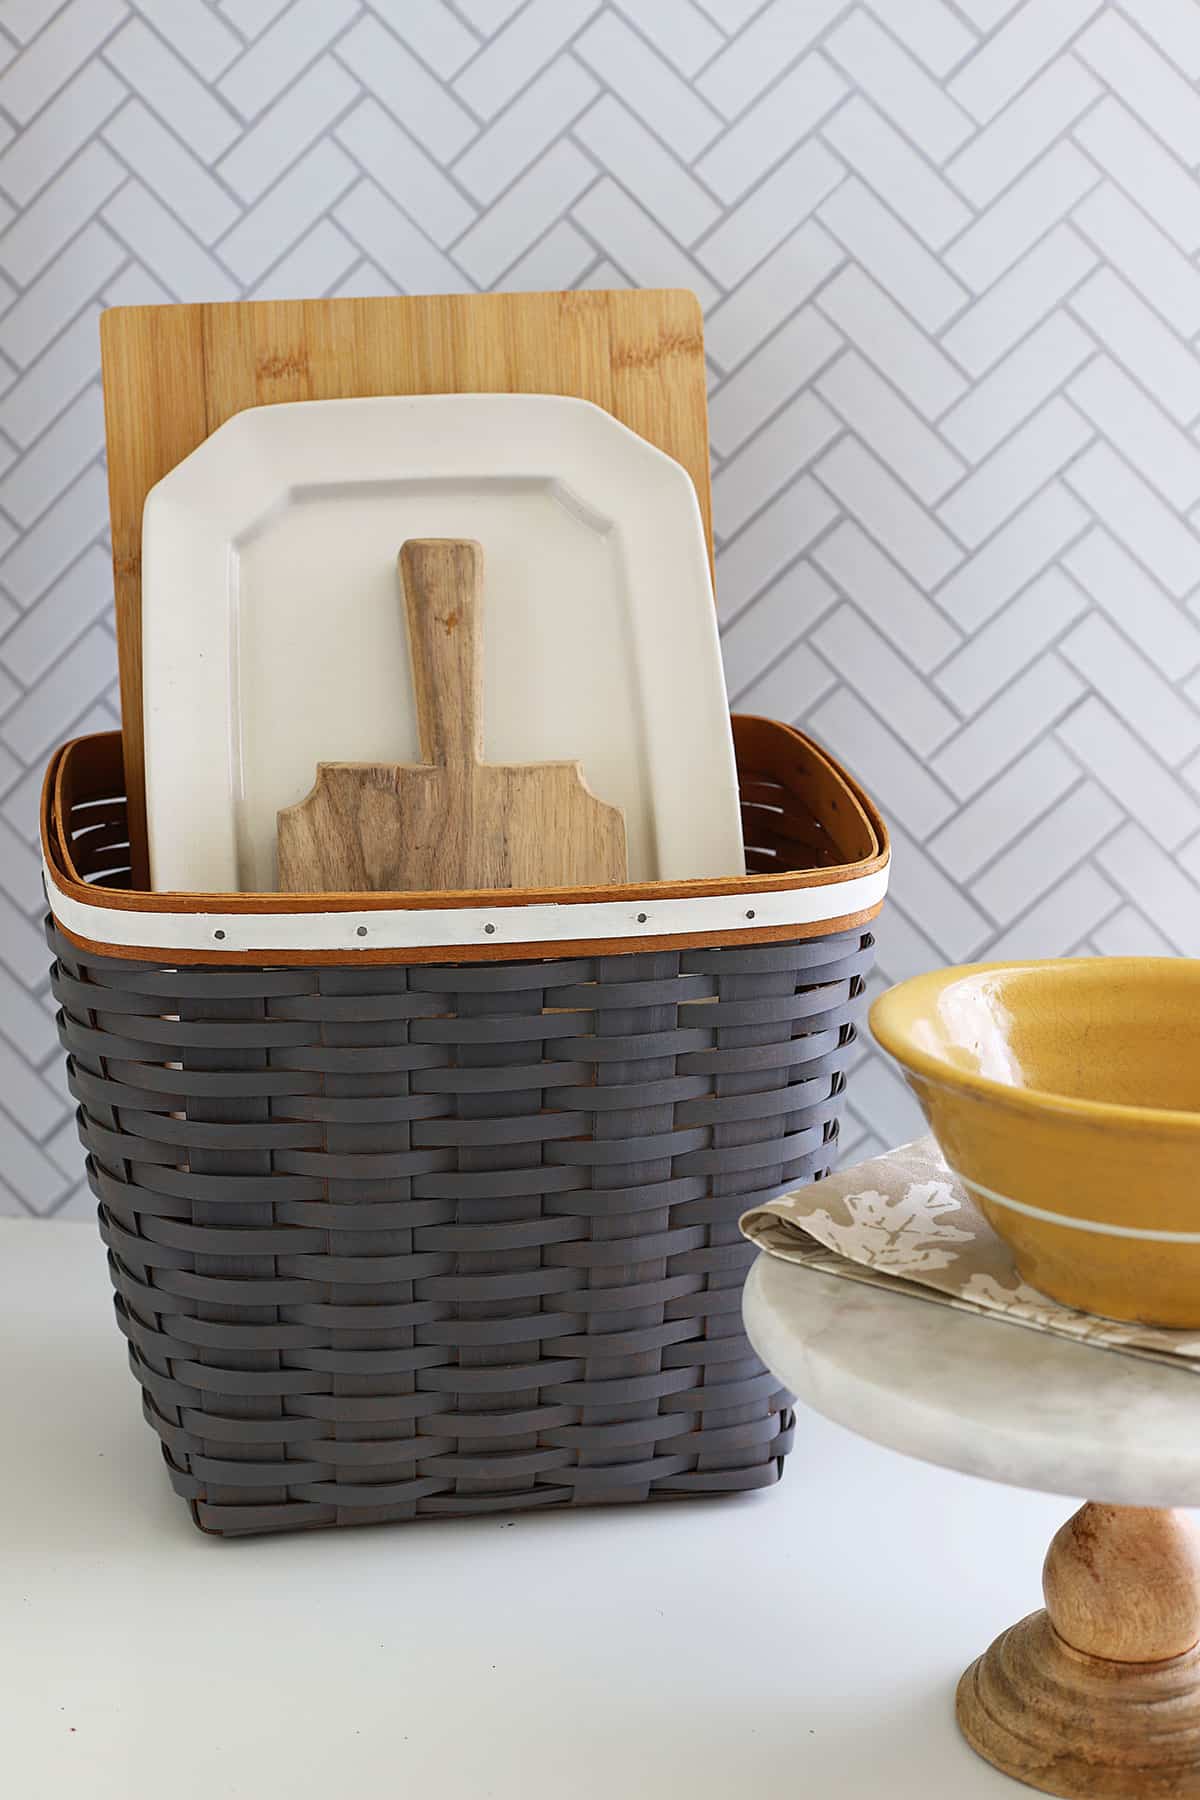 Breathe new life into your vintage Longaberger baskets. Discover how to paint these beloved collectibles to compliment your modern home decor. Bring them out of storage and start using them again!